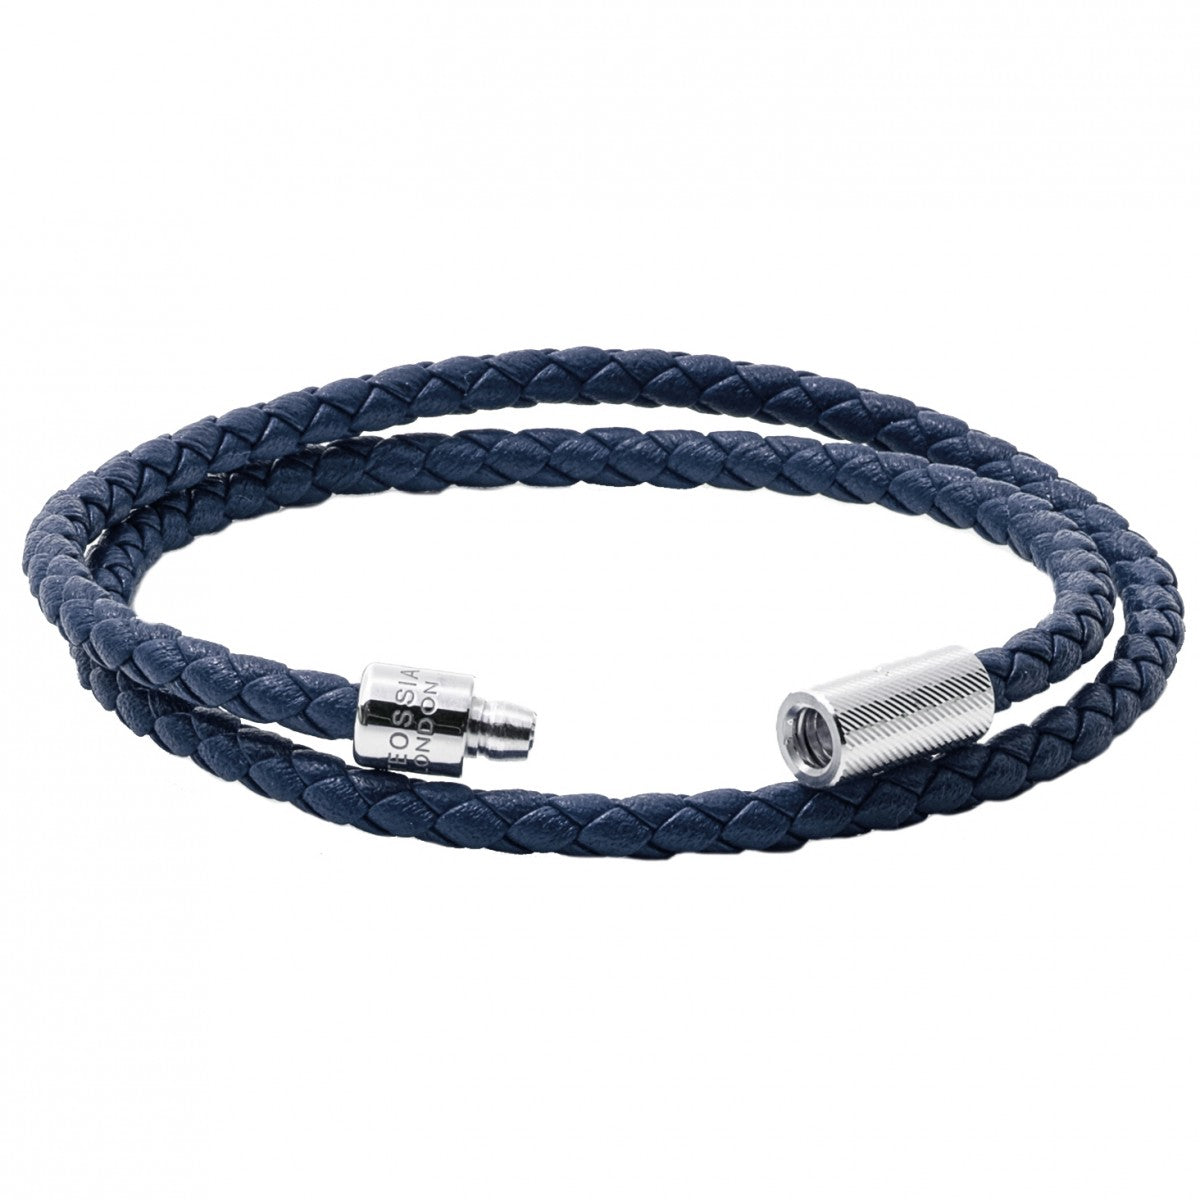 Tateossian POP Rigato Braided Leather Wrap Bracelet with Sterling Silver Cylindrical Pop Tube Clasp, Navy